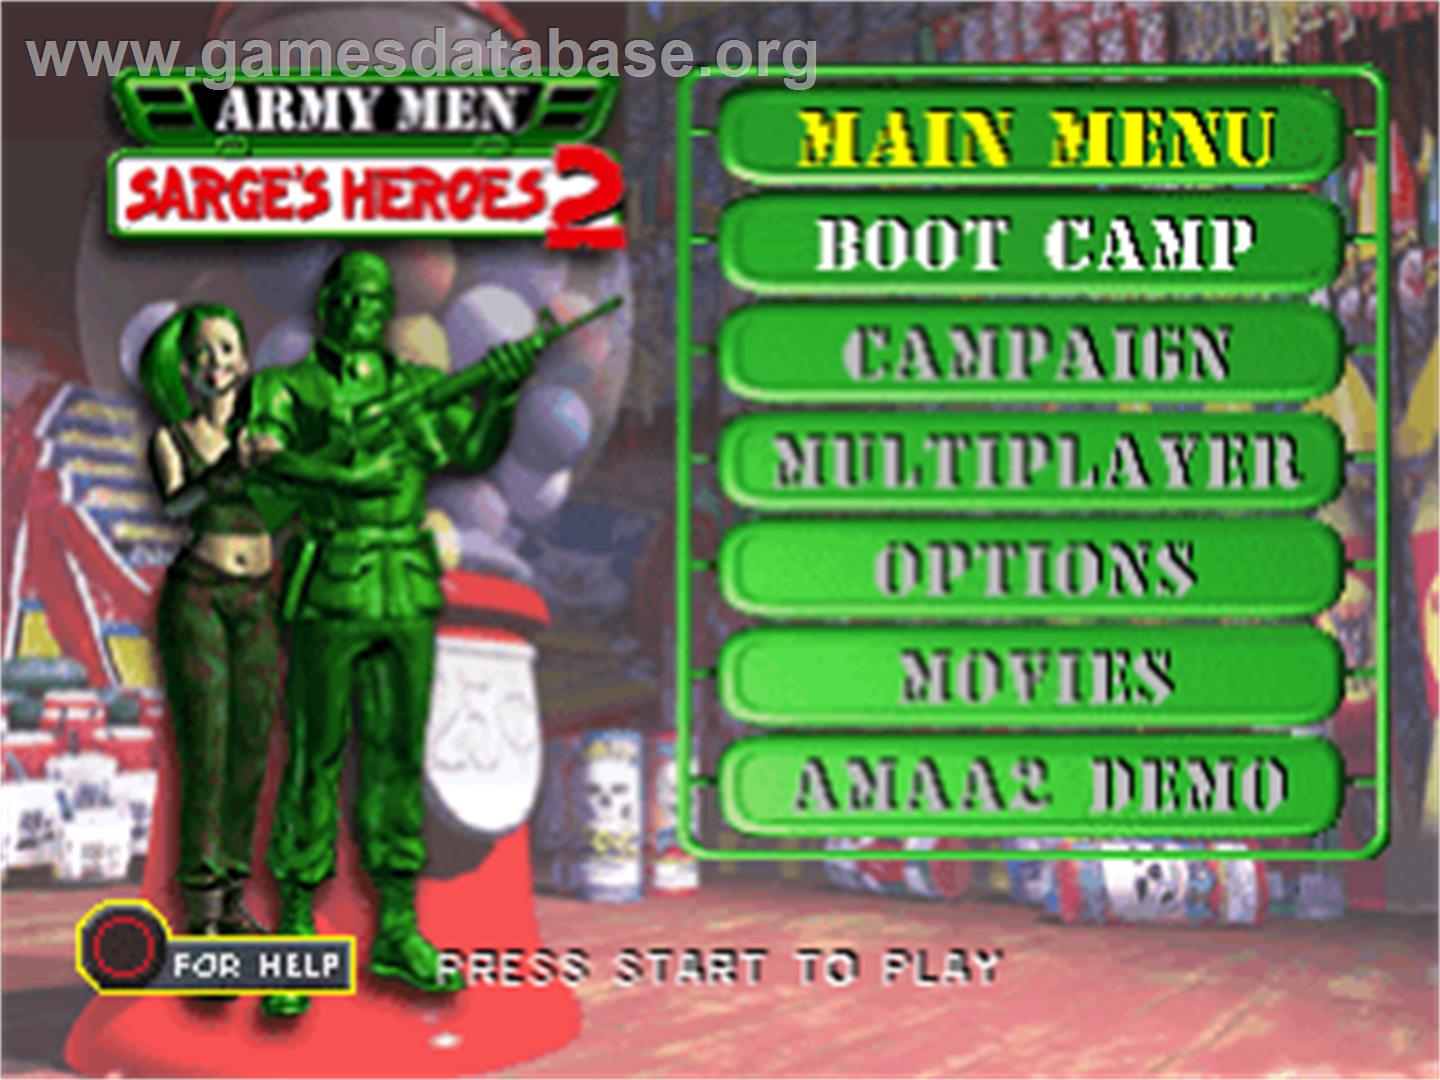 Army Men: Sarge's Heroes 2 - Sony Playstation - Artwork - Title Screen